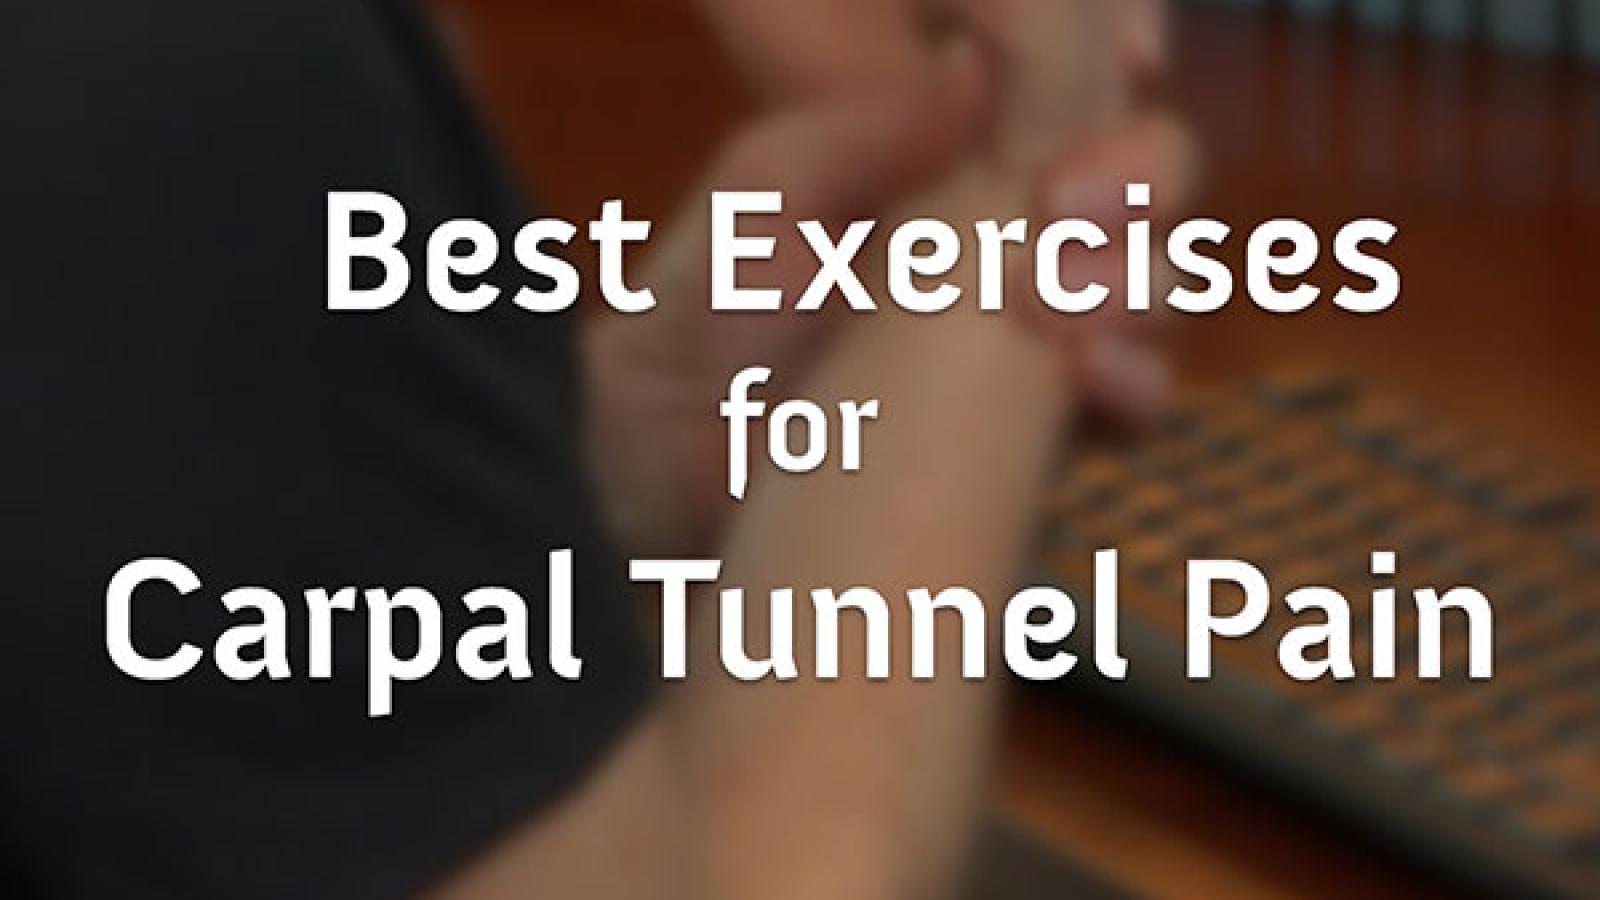 Video: 3 Exercises to Ease Carpal Tunnel Pain